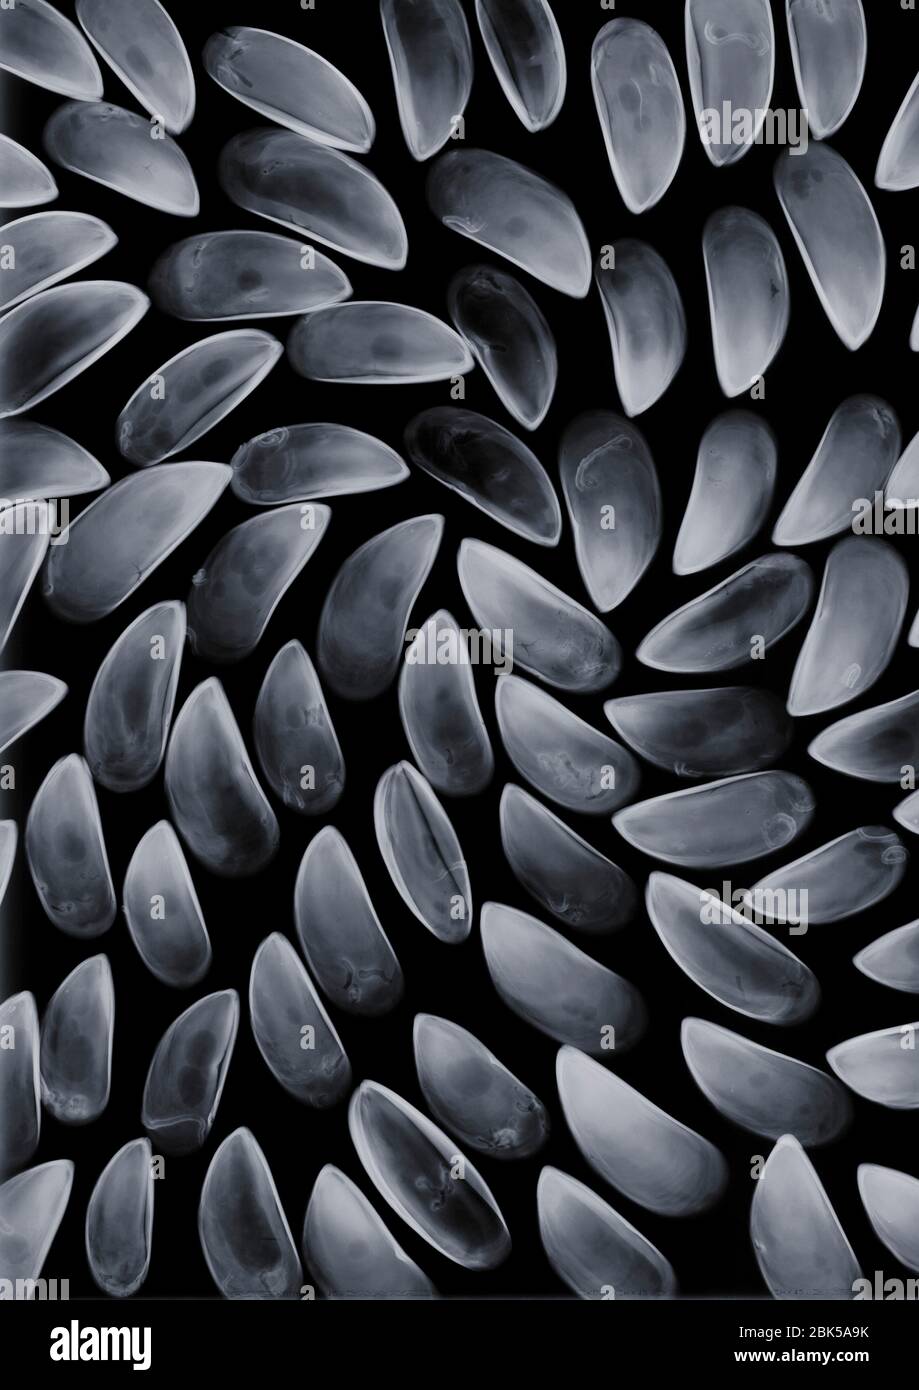 Mussels in a swirl, X-ray. Stock Photo